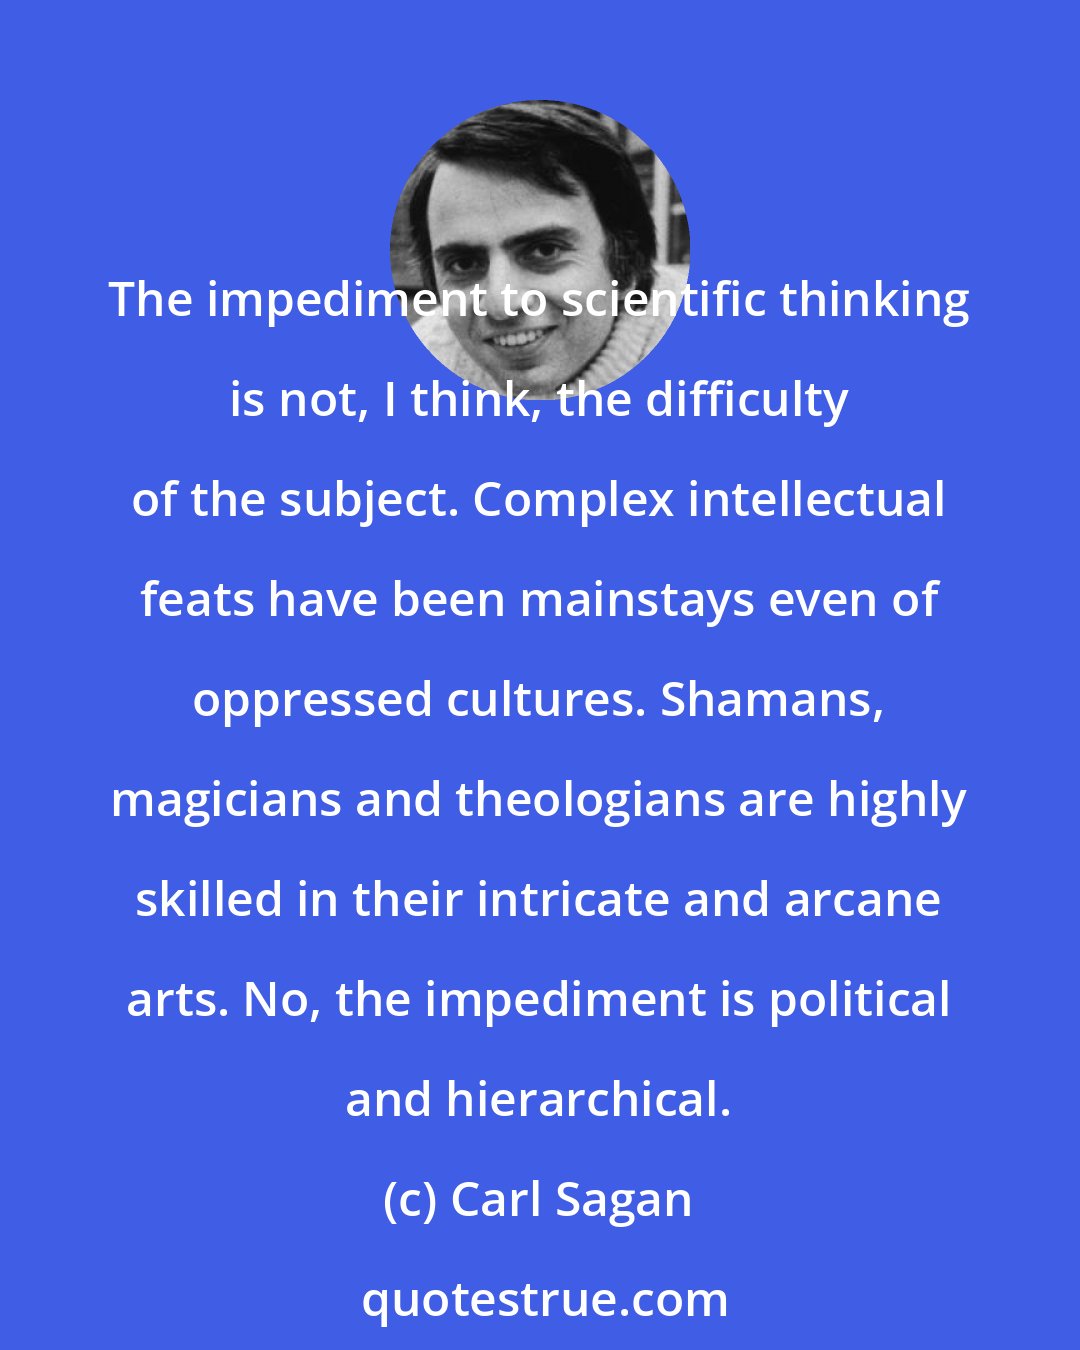 Carl Sagan: The impediment to scientific thinking is not, I think, the difficulty of the subject. Complex intellectual feats have been mainstays even of oppressed cultures. Shamans, magicians and theologians are highly skilled in their intricate and arcane arts. No, the impediment is political and hierarchical.